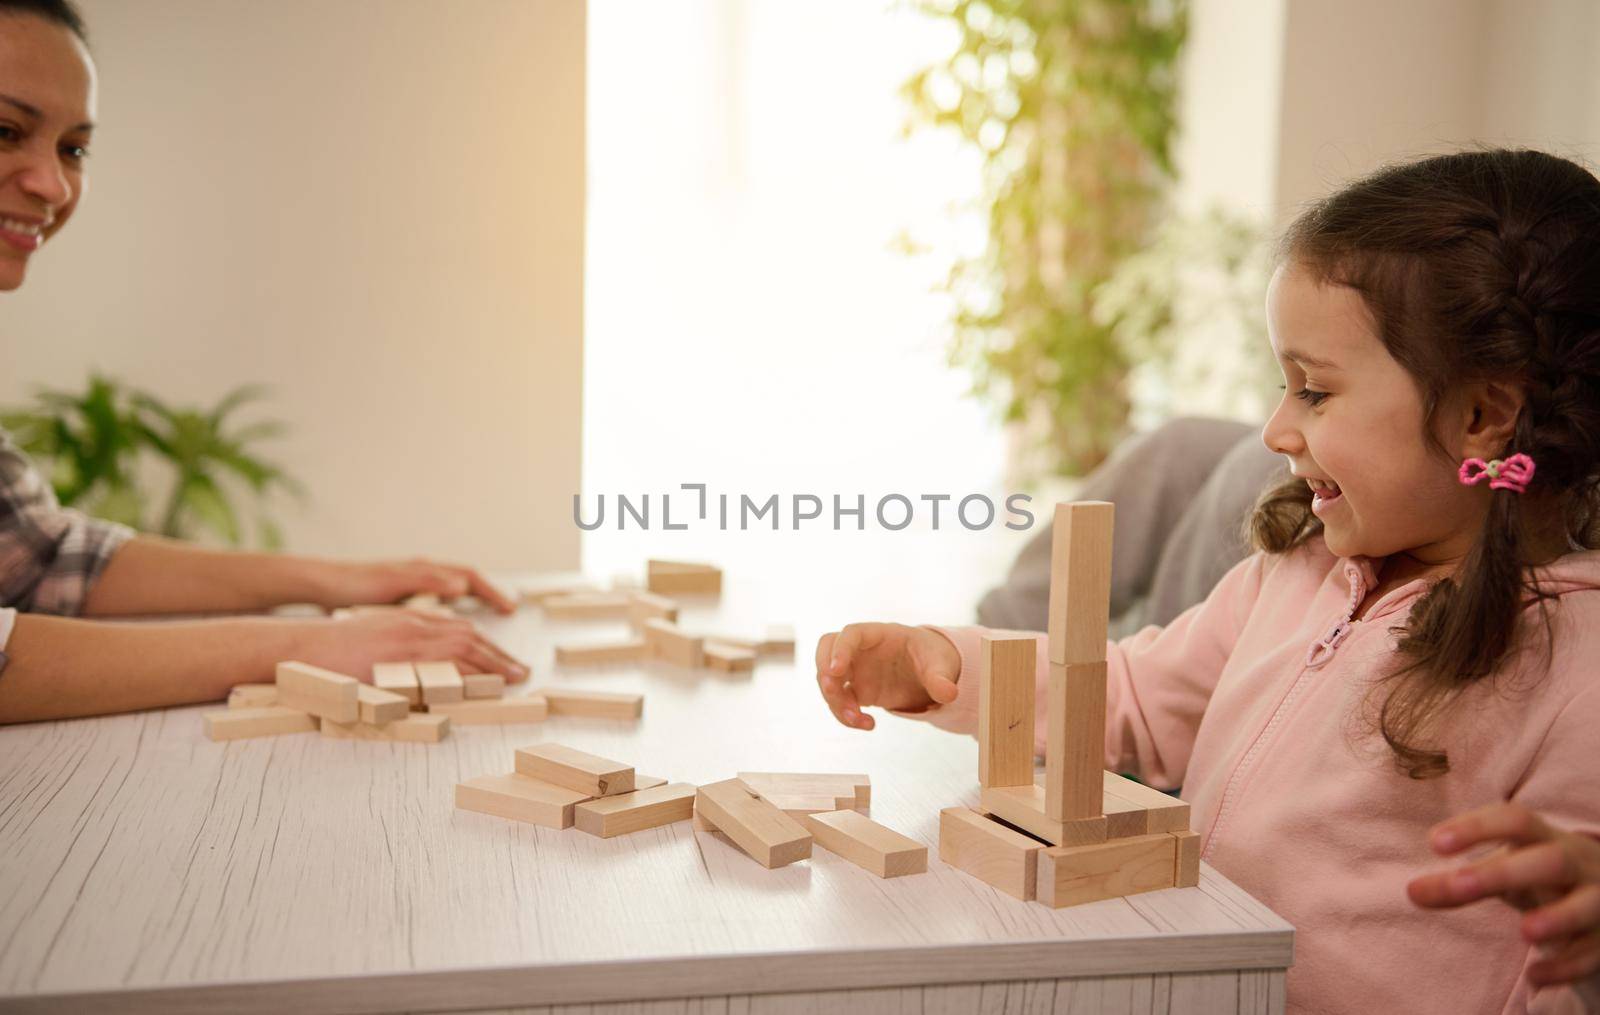 Beautiful child, adorable little girl in pink sweatshirt plays board game with her mother, builds wooden structures from wooden bricks and blocks, smiles toothy smile, enjoying her educational pastime by artgf